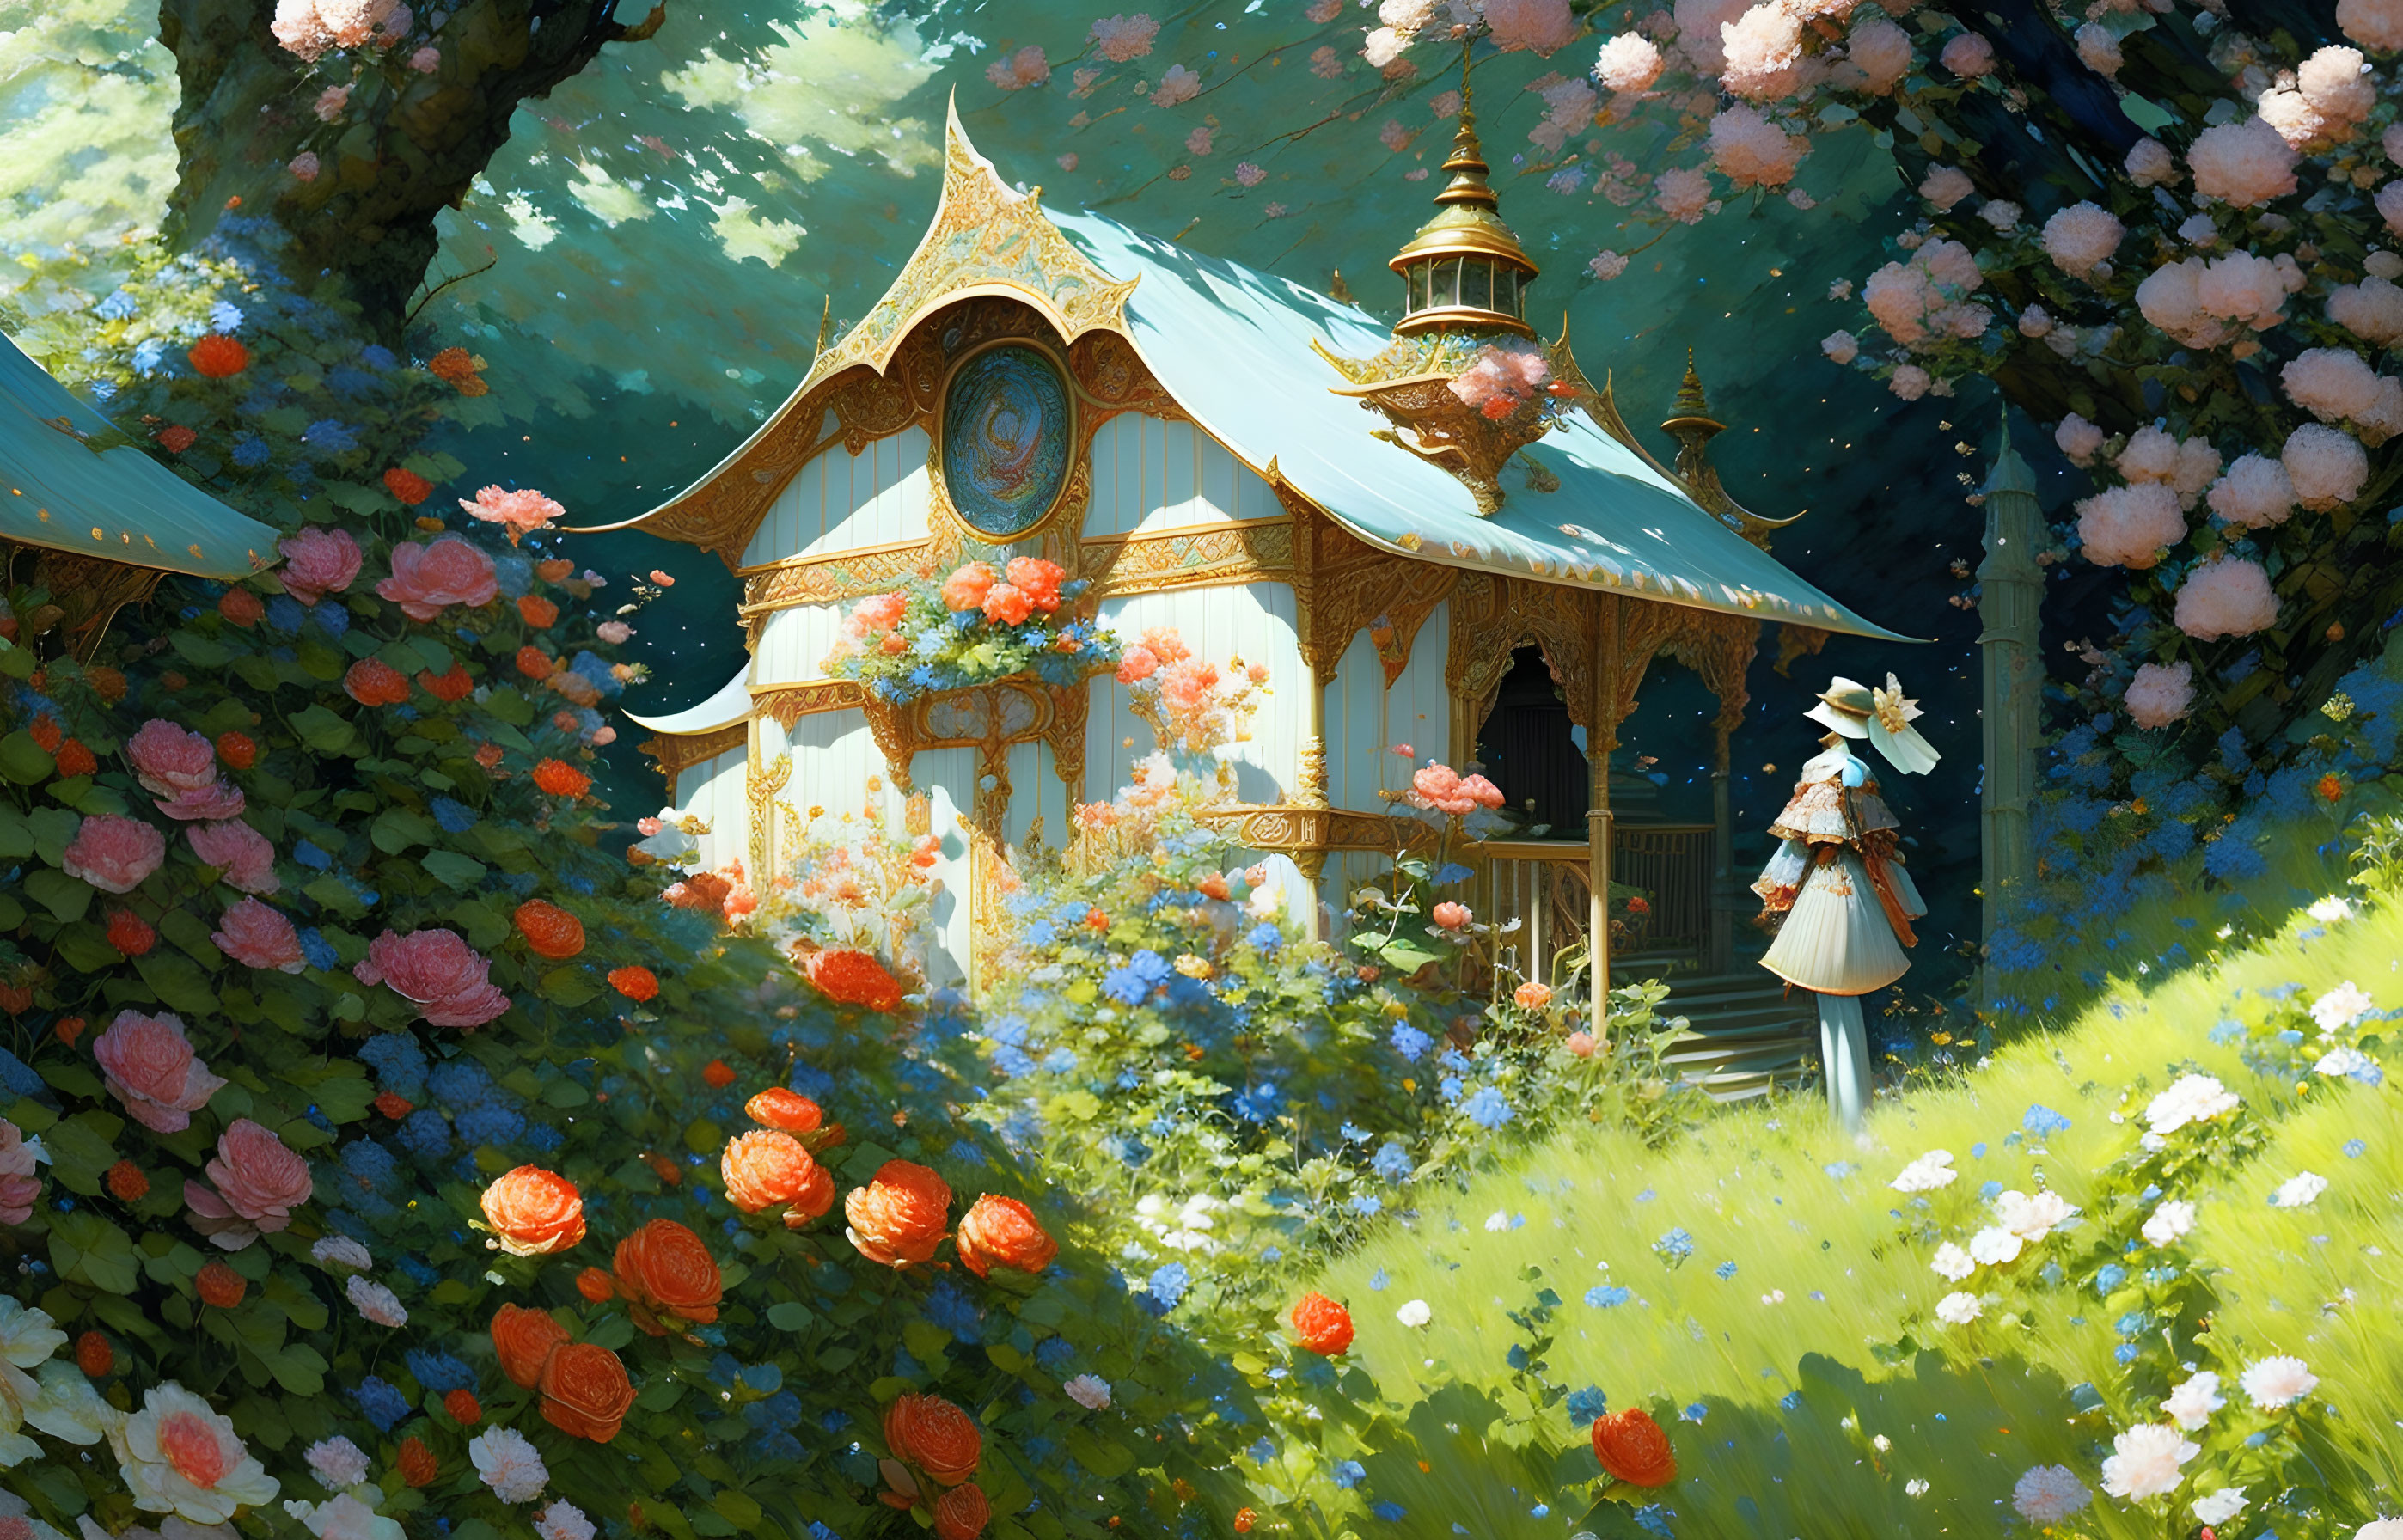 Charming cottage with ornate roofs surrounded by blooming flowers